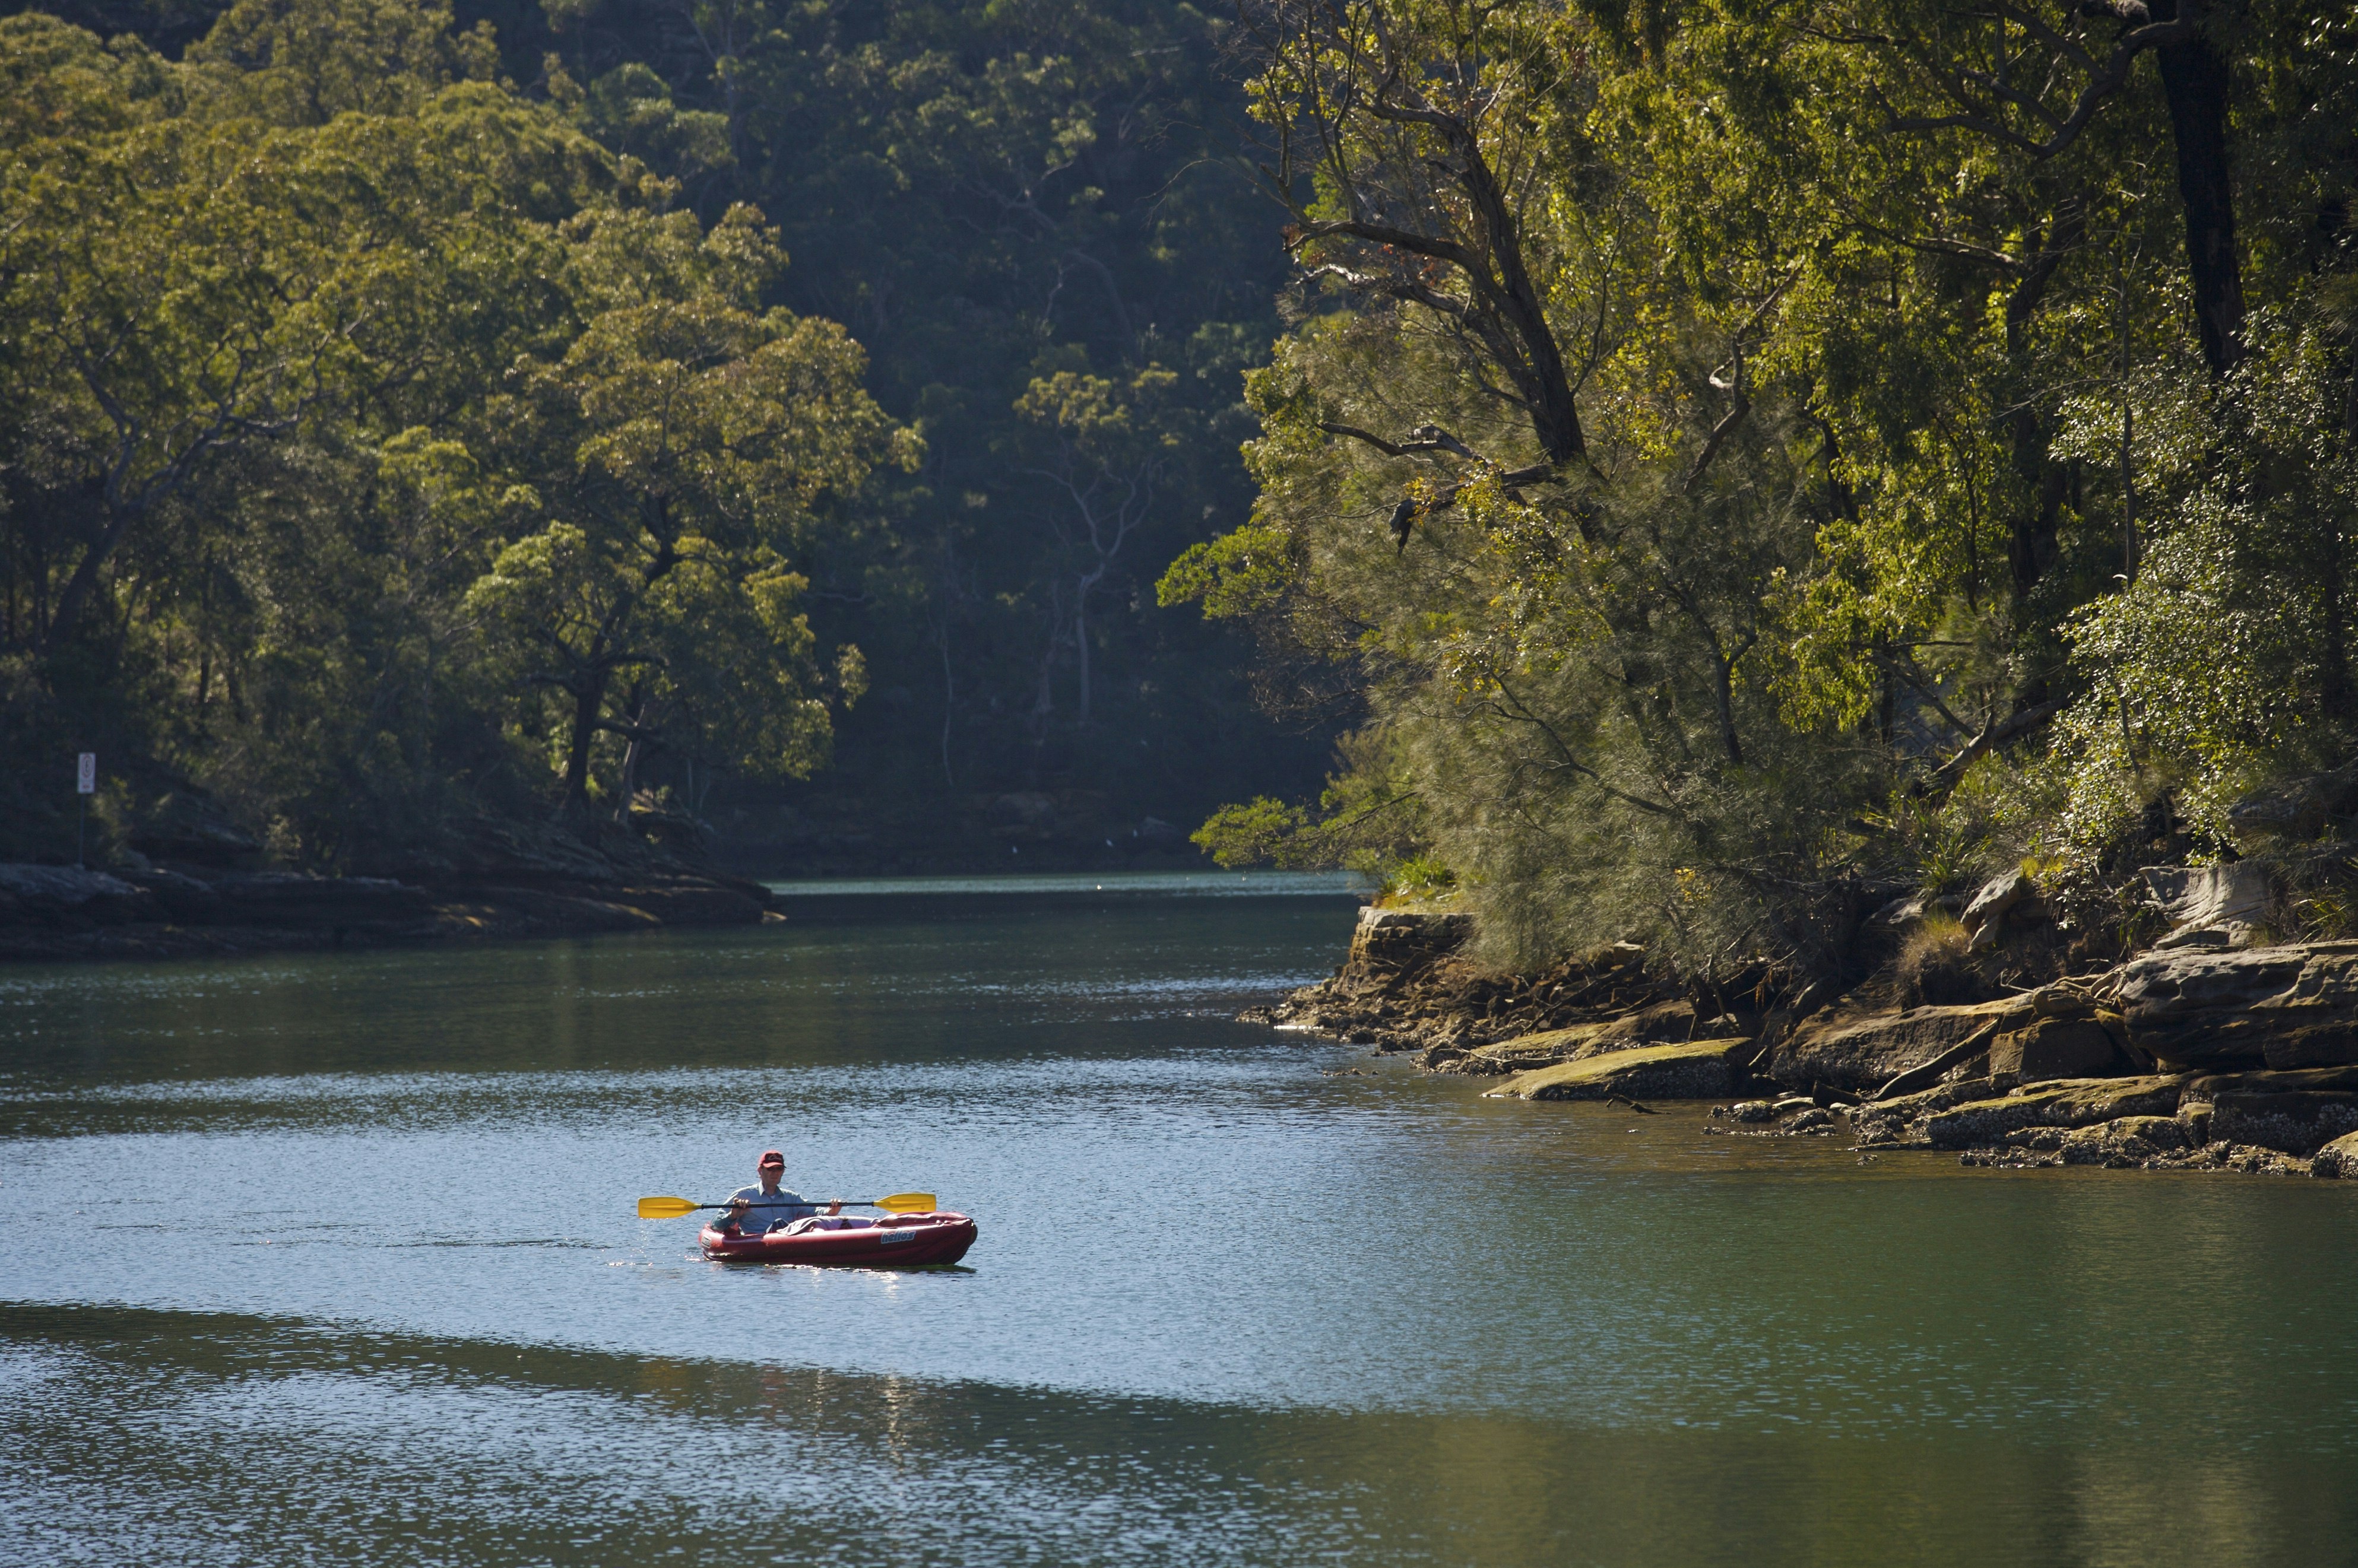 Canoeing near Audley, Royal National Park, New South Wales, Australia, Australasia